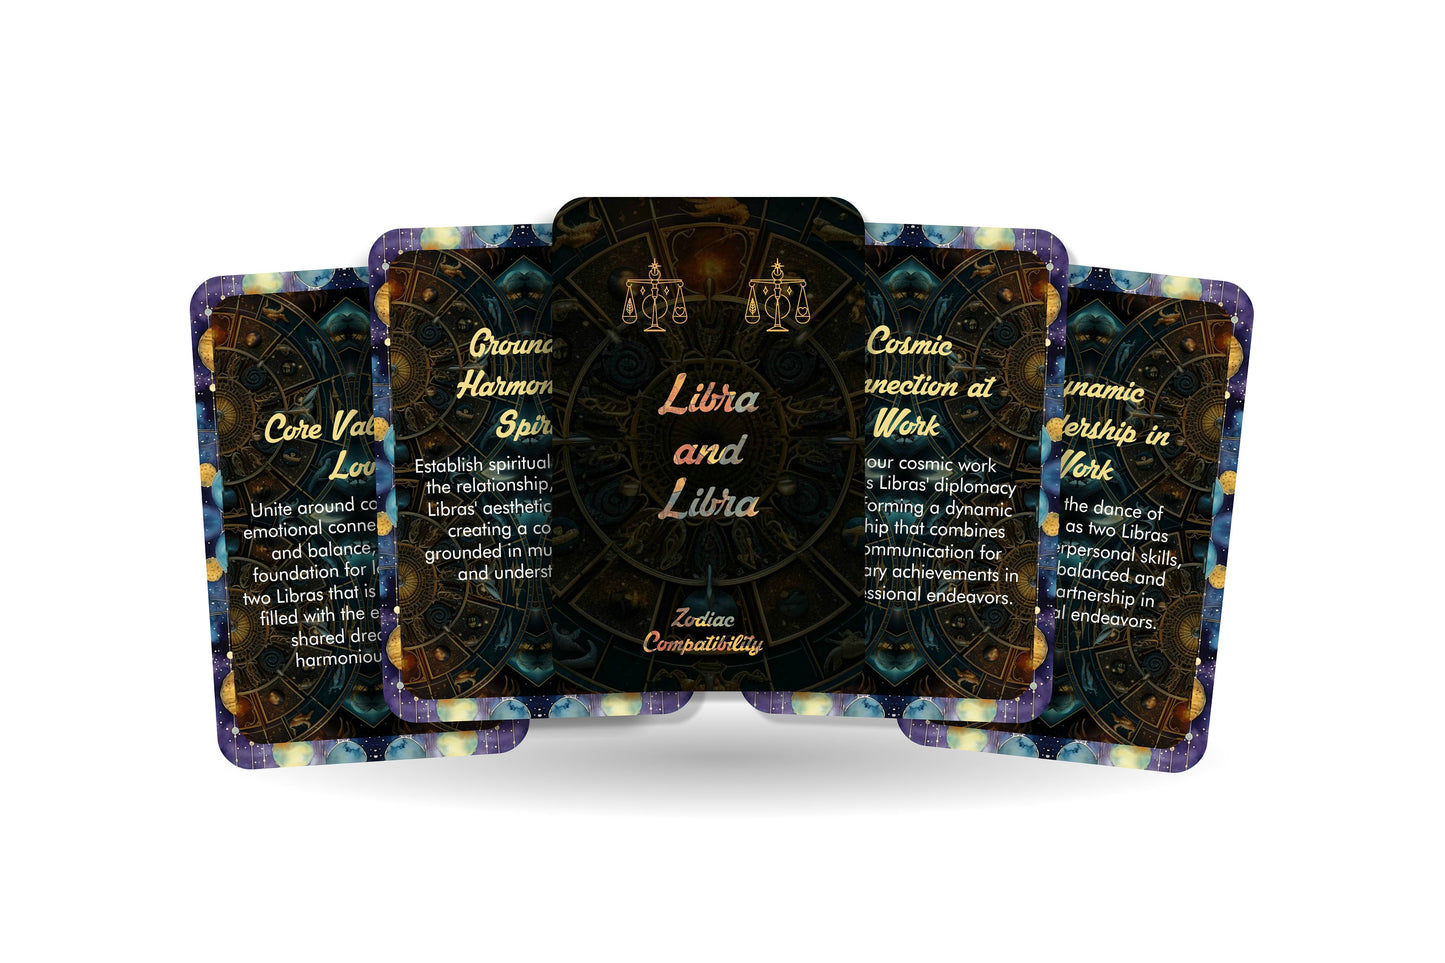 Libra and Libra - Zodiac Compatibility - Divination tools - Oracle cards - Star Sign Compatibility - Horoscope Compatibility Cards